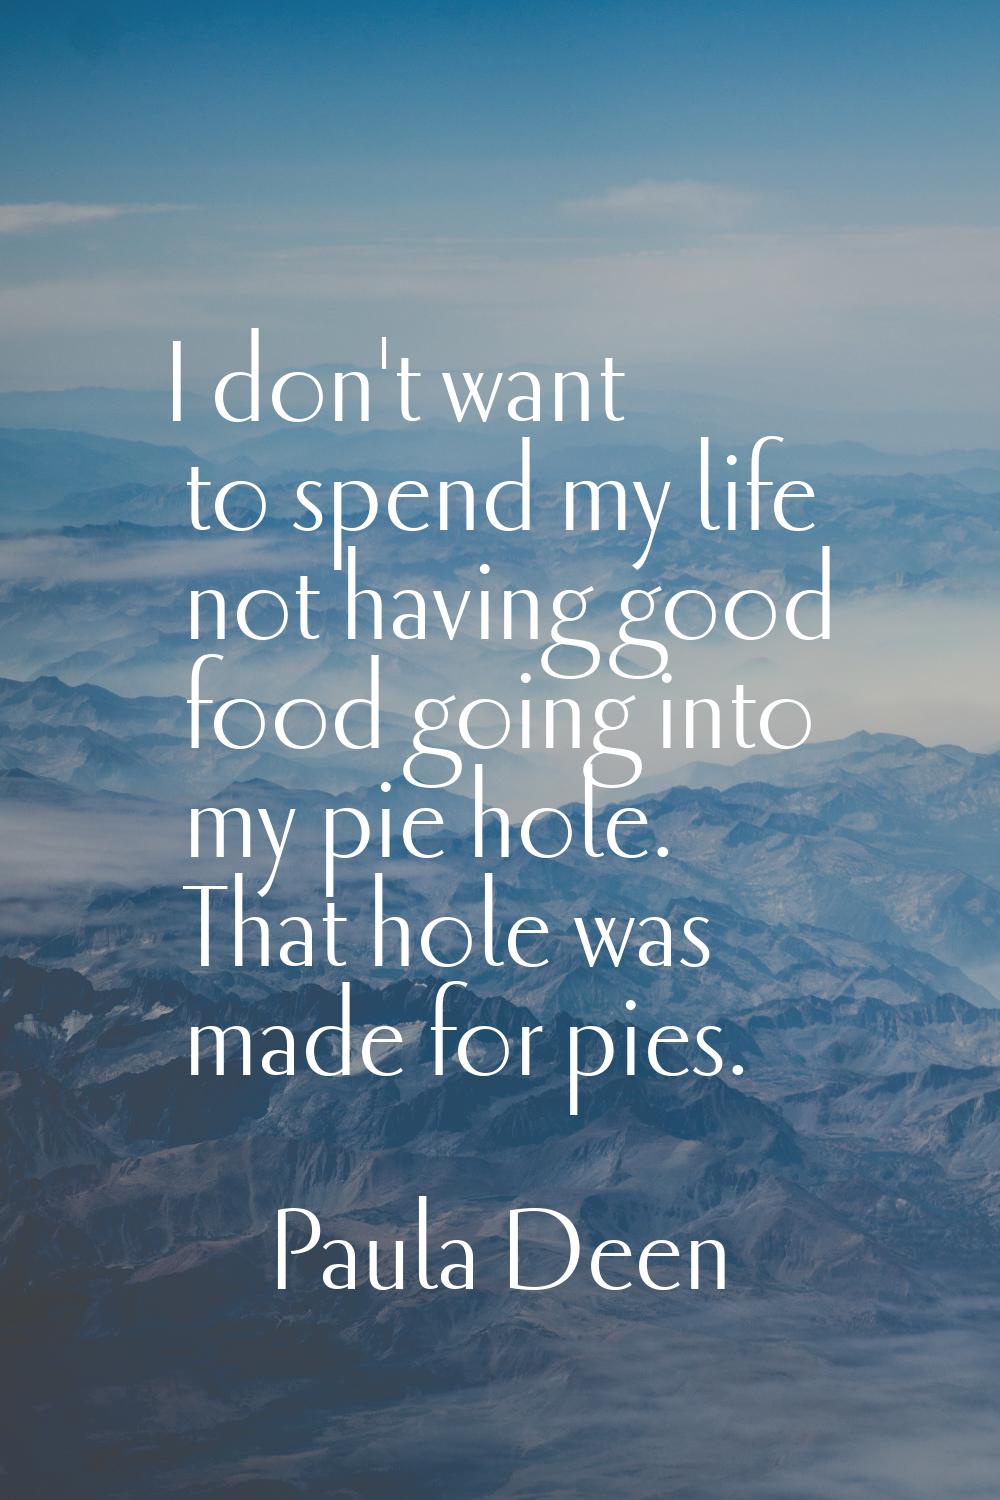 I don't want to spend my life not having good food going into my pie hole. That hole was made for p